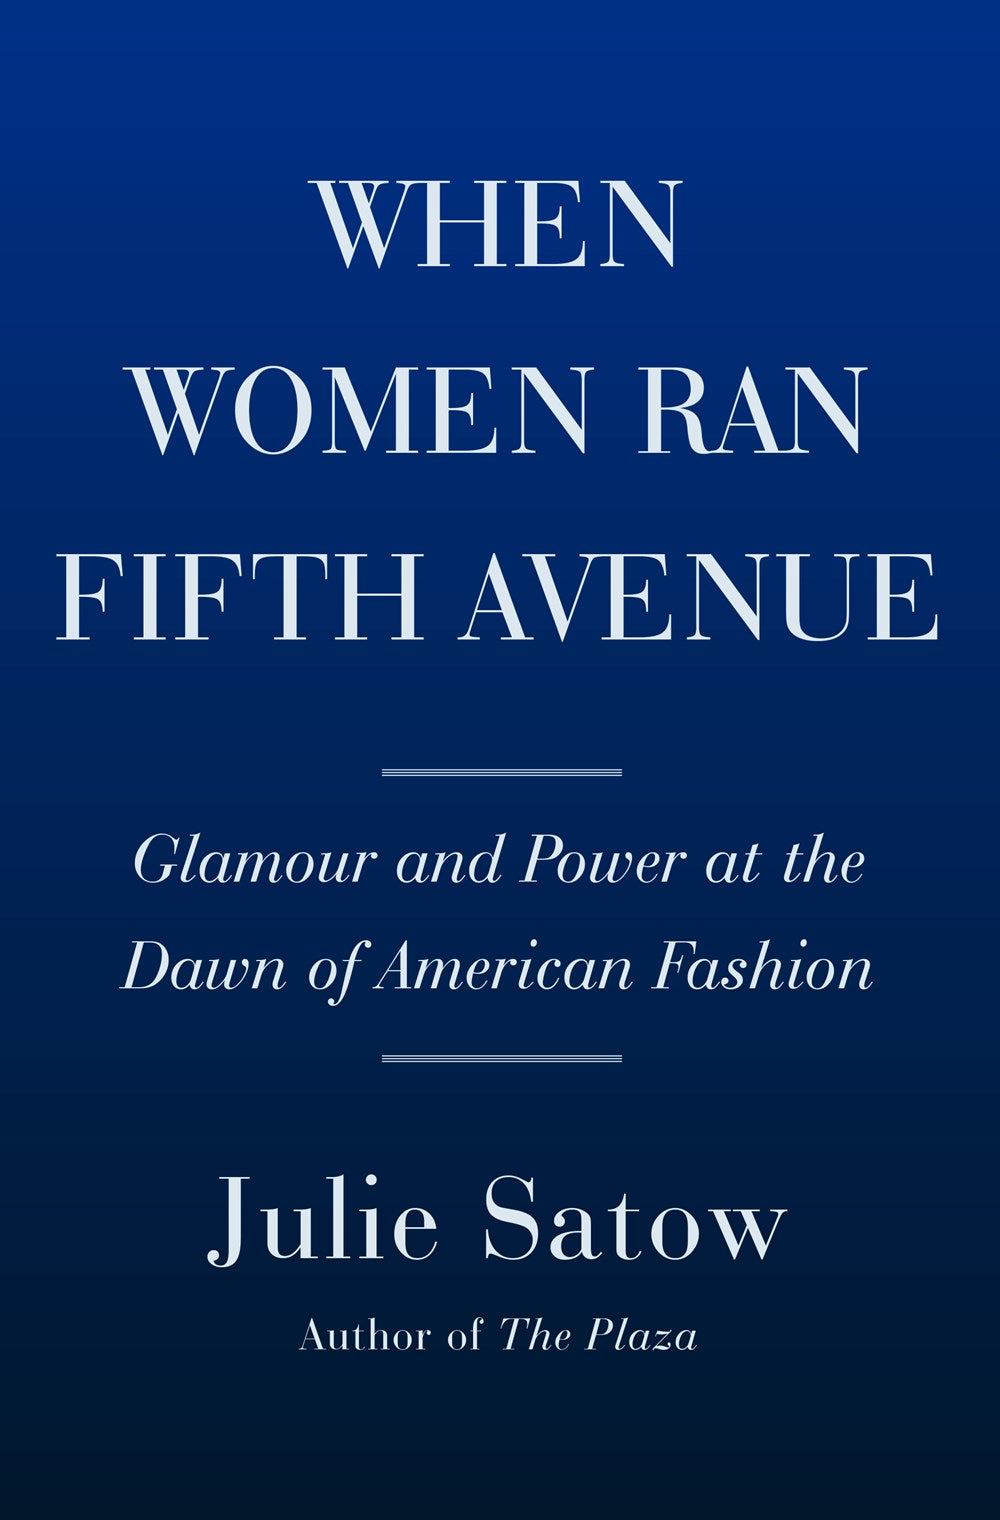 When Women Ran Fifth Avenue: Glamour and Power at the Dawn of American Fashion by Julie Satow (6/4/24)